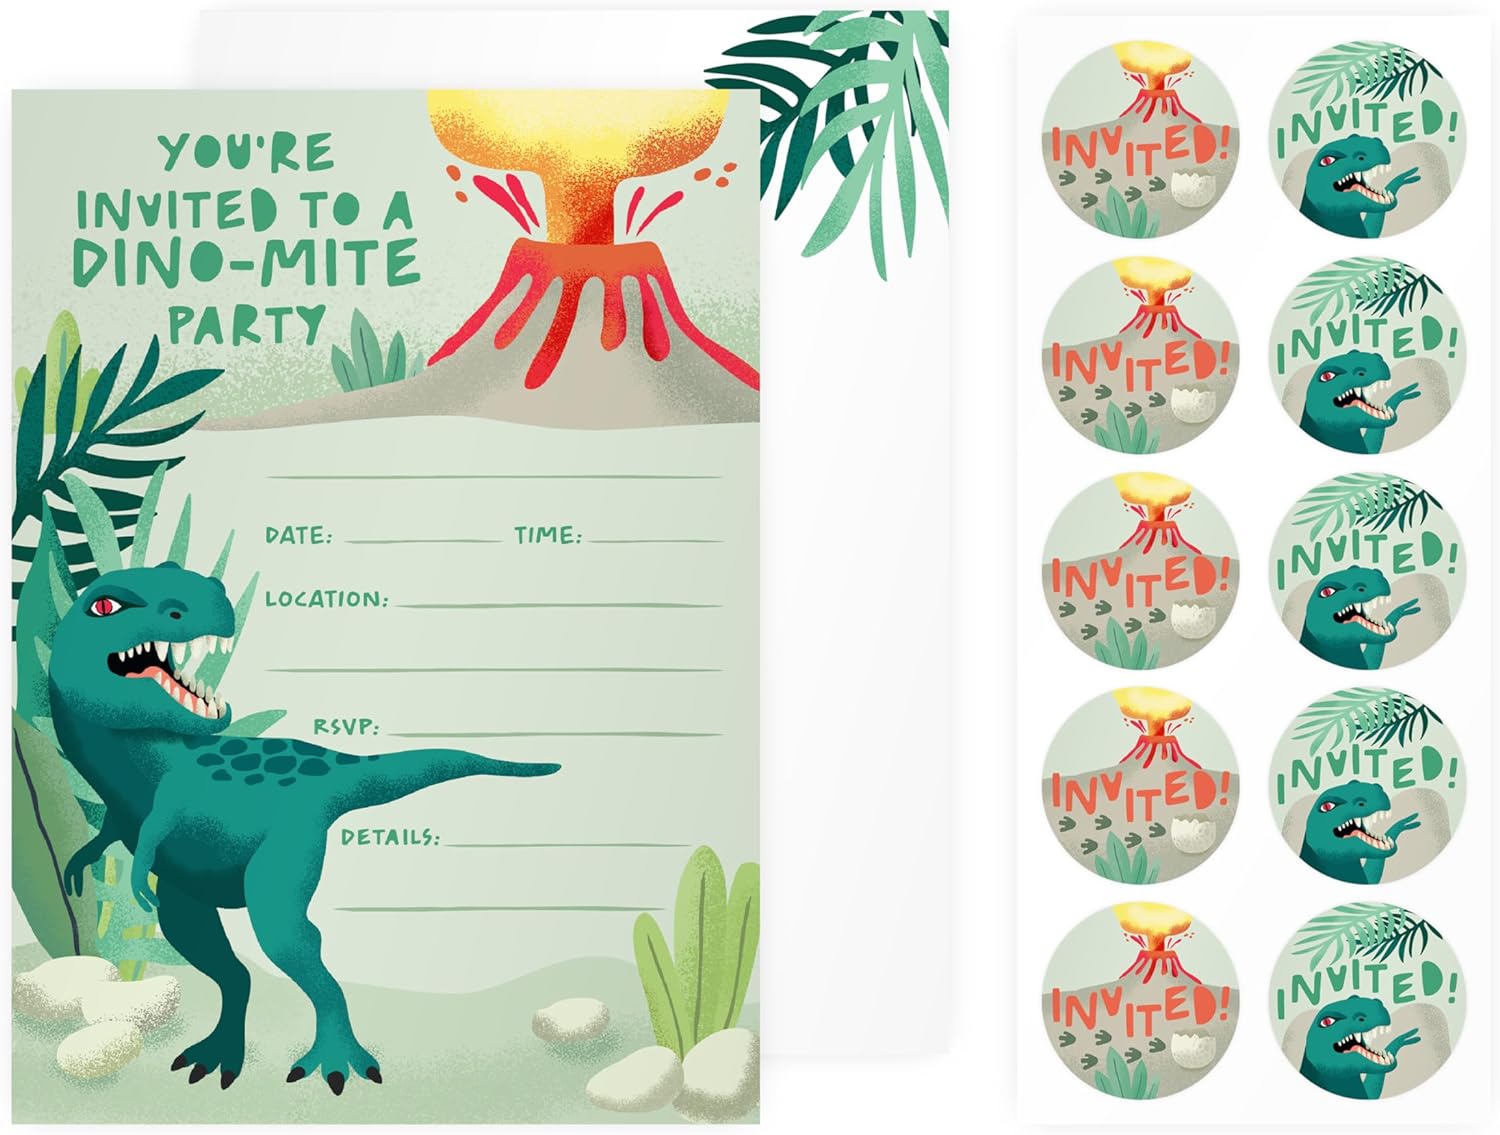 Rileys & Co. Party Invitation Cards with Envelopes and Bonus Stickers, Party Invitation Cards for Boys and Girls with Cute Graphics, Personalized Date, Time, Location, RSVP - Premium Quality for Unforgettable Celebrations! 7x5 Inches - 50 Pack (Dinosaur)